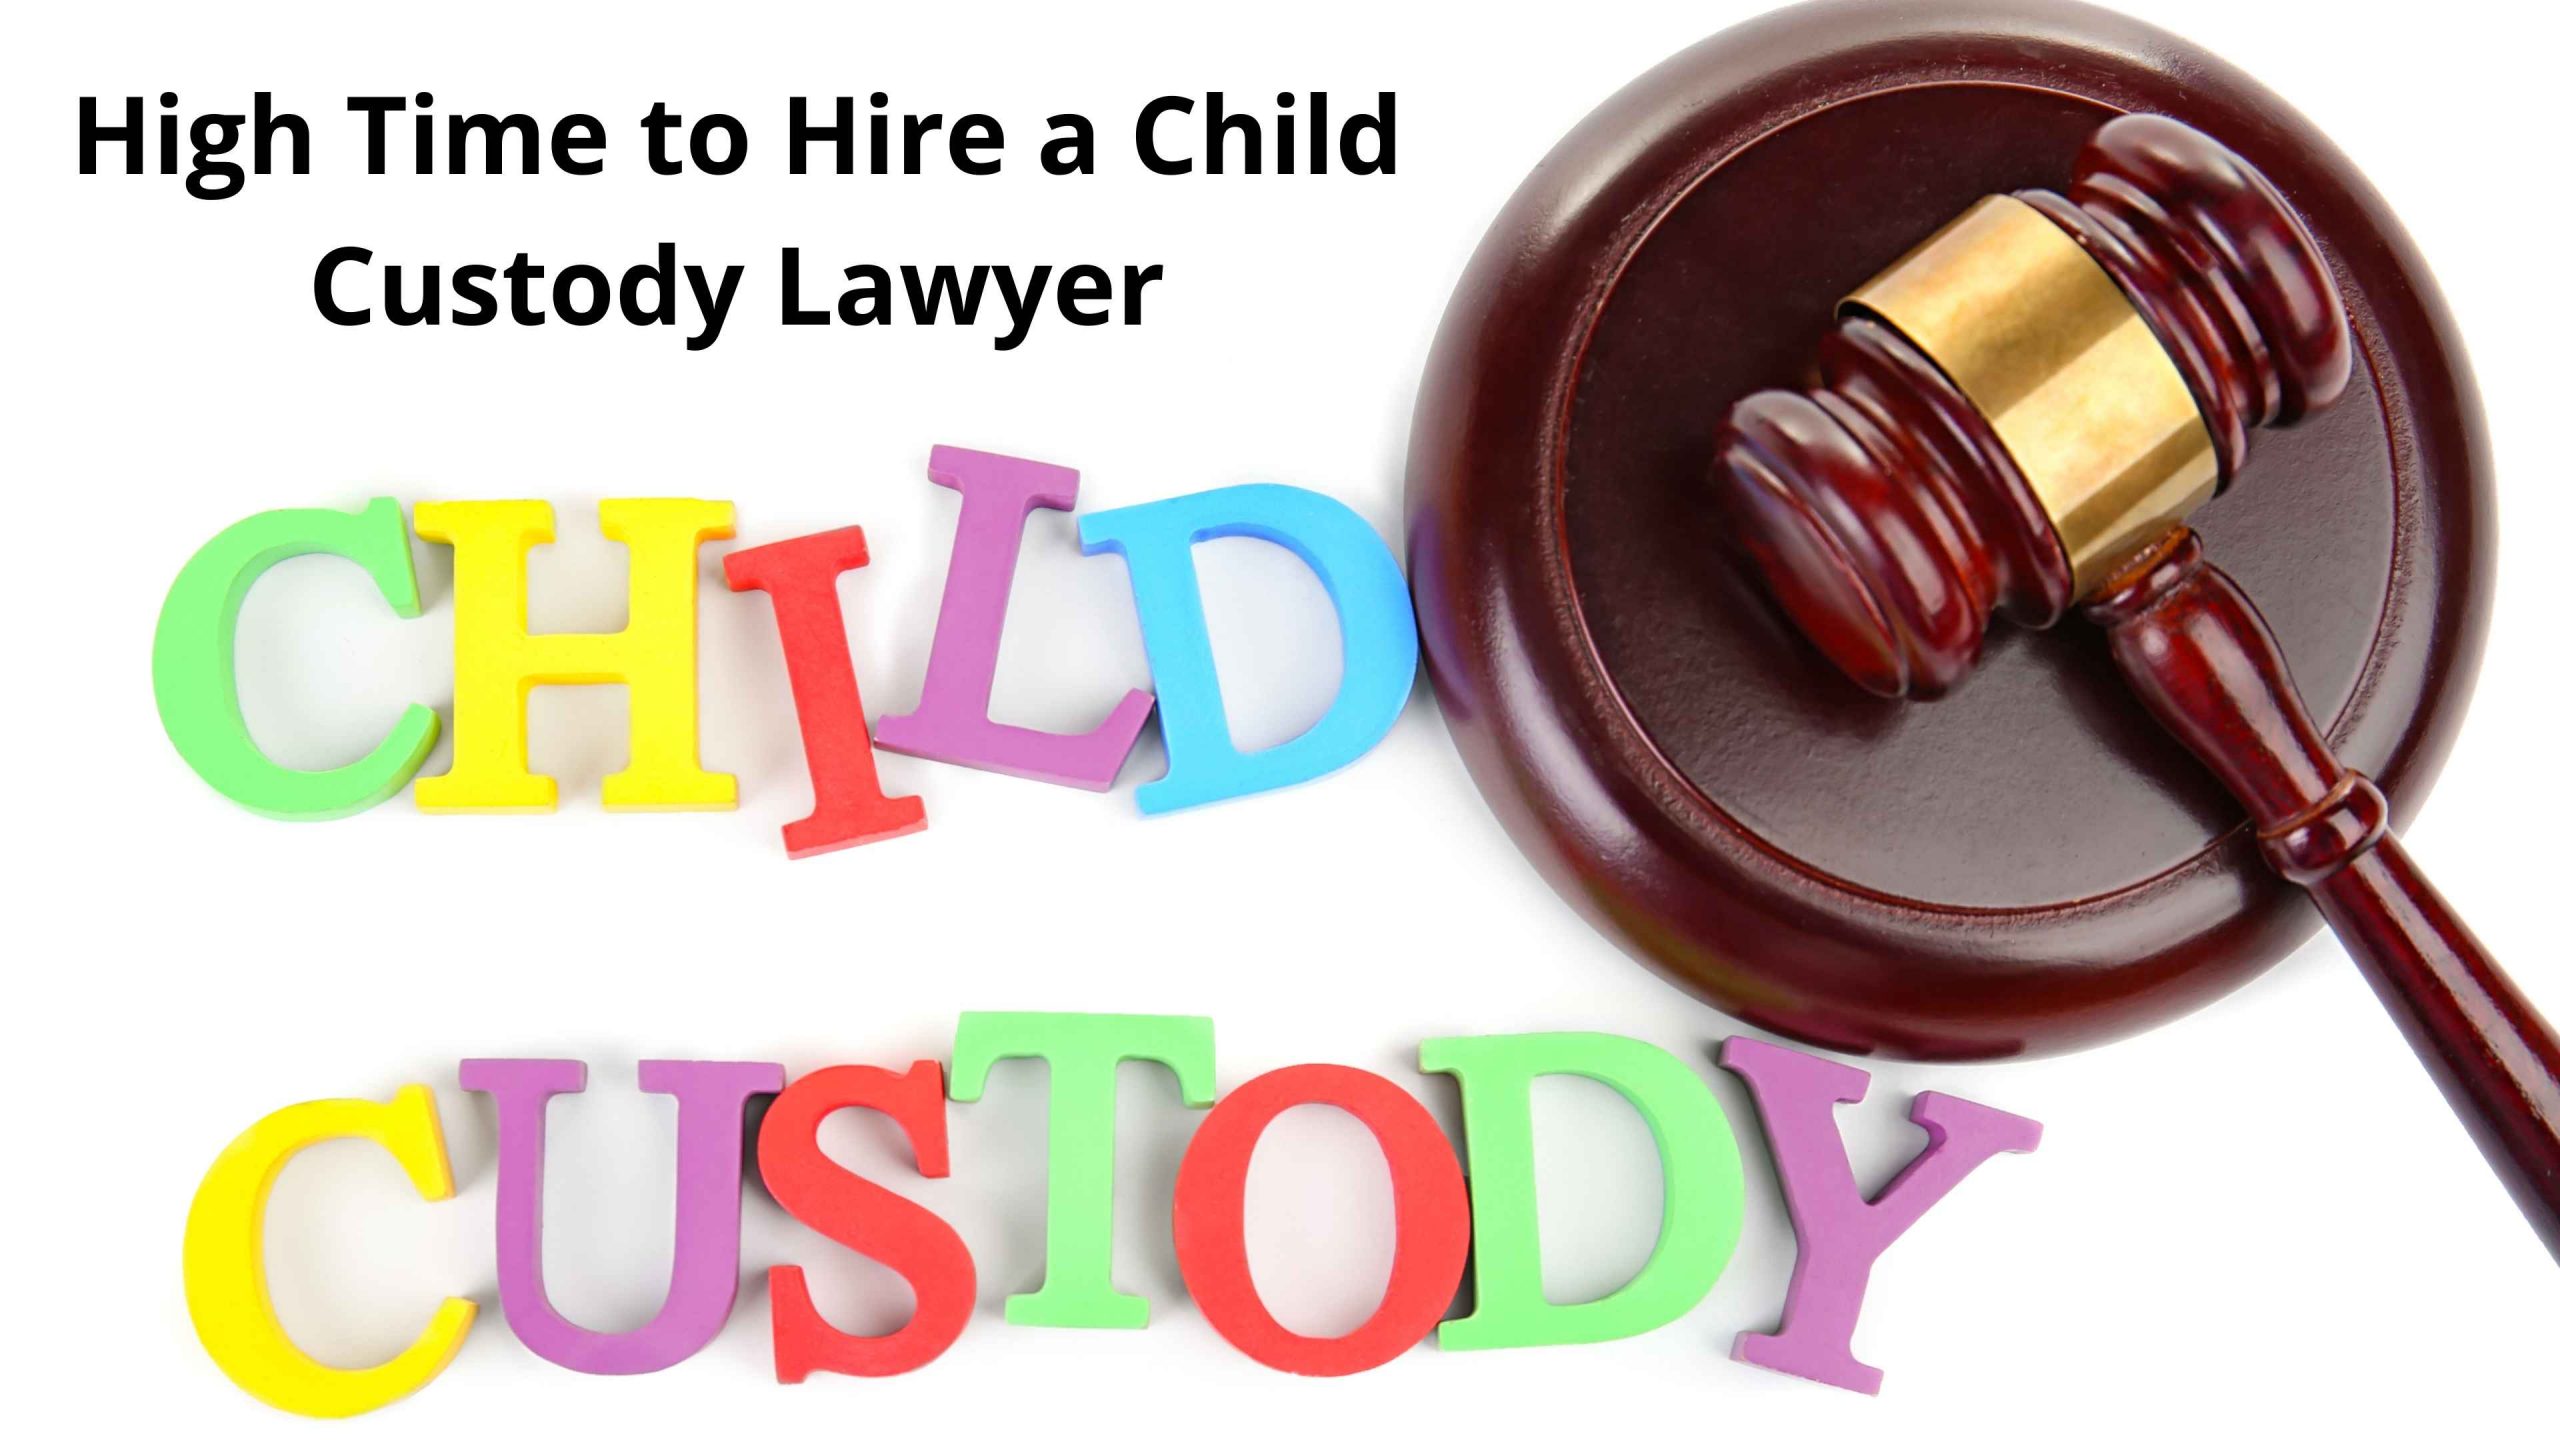 4 Signs that indicate It’s High Time to Hire a Child Custody Lawyer